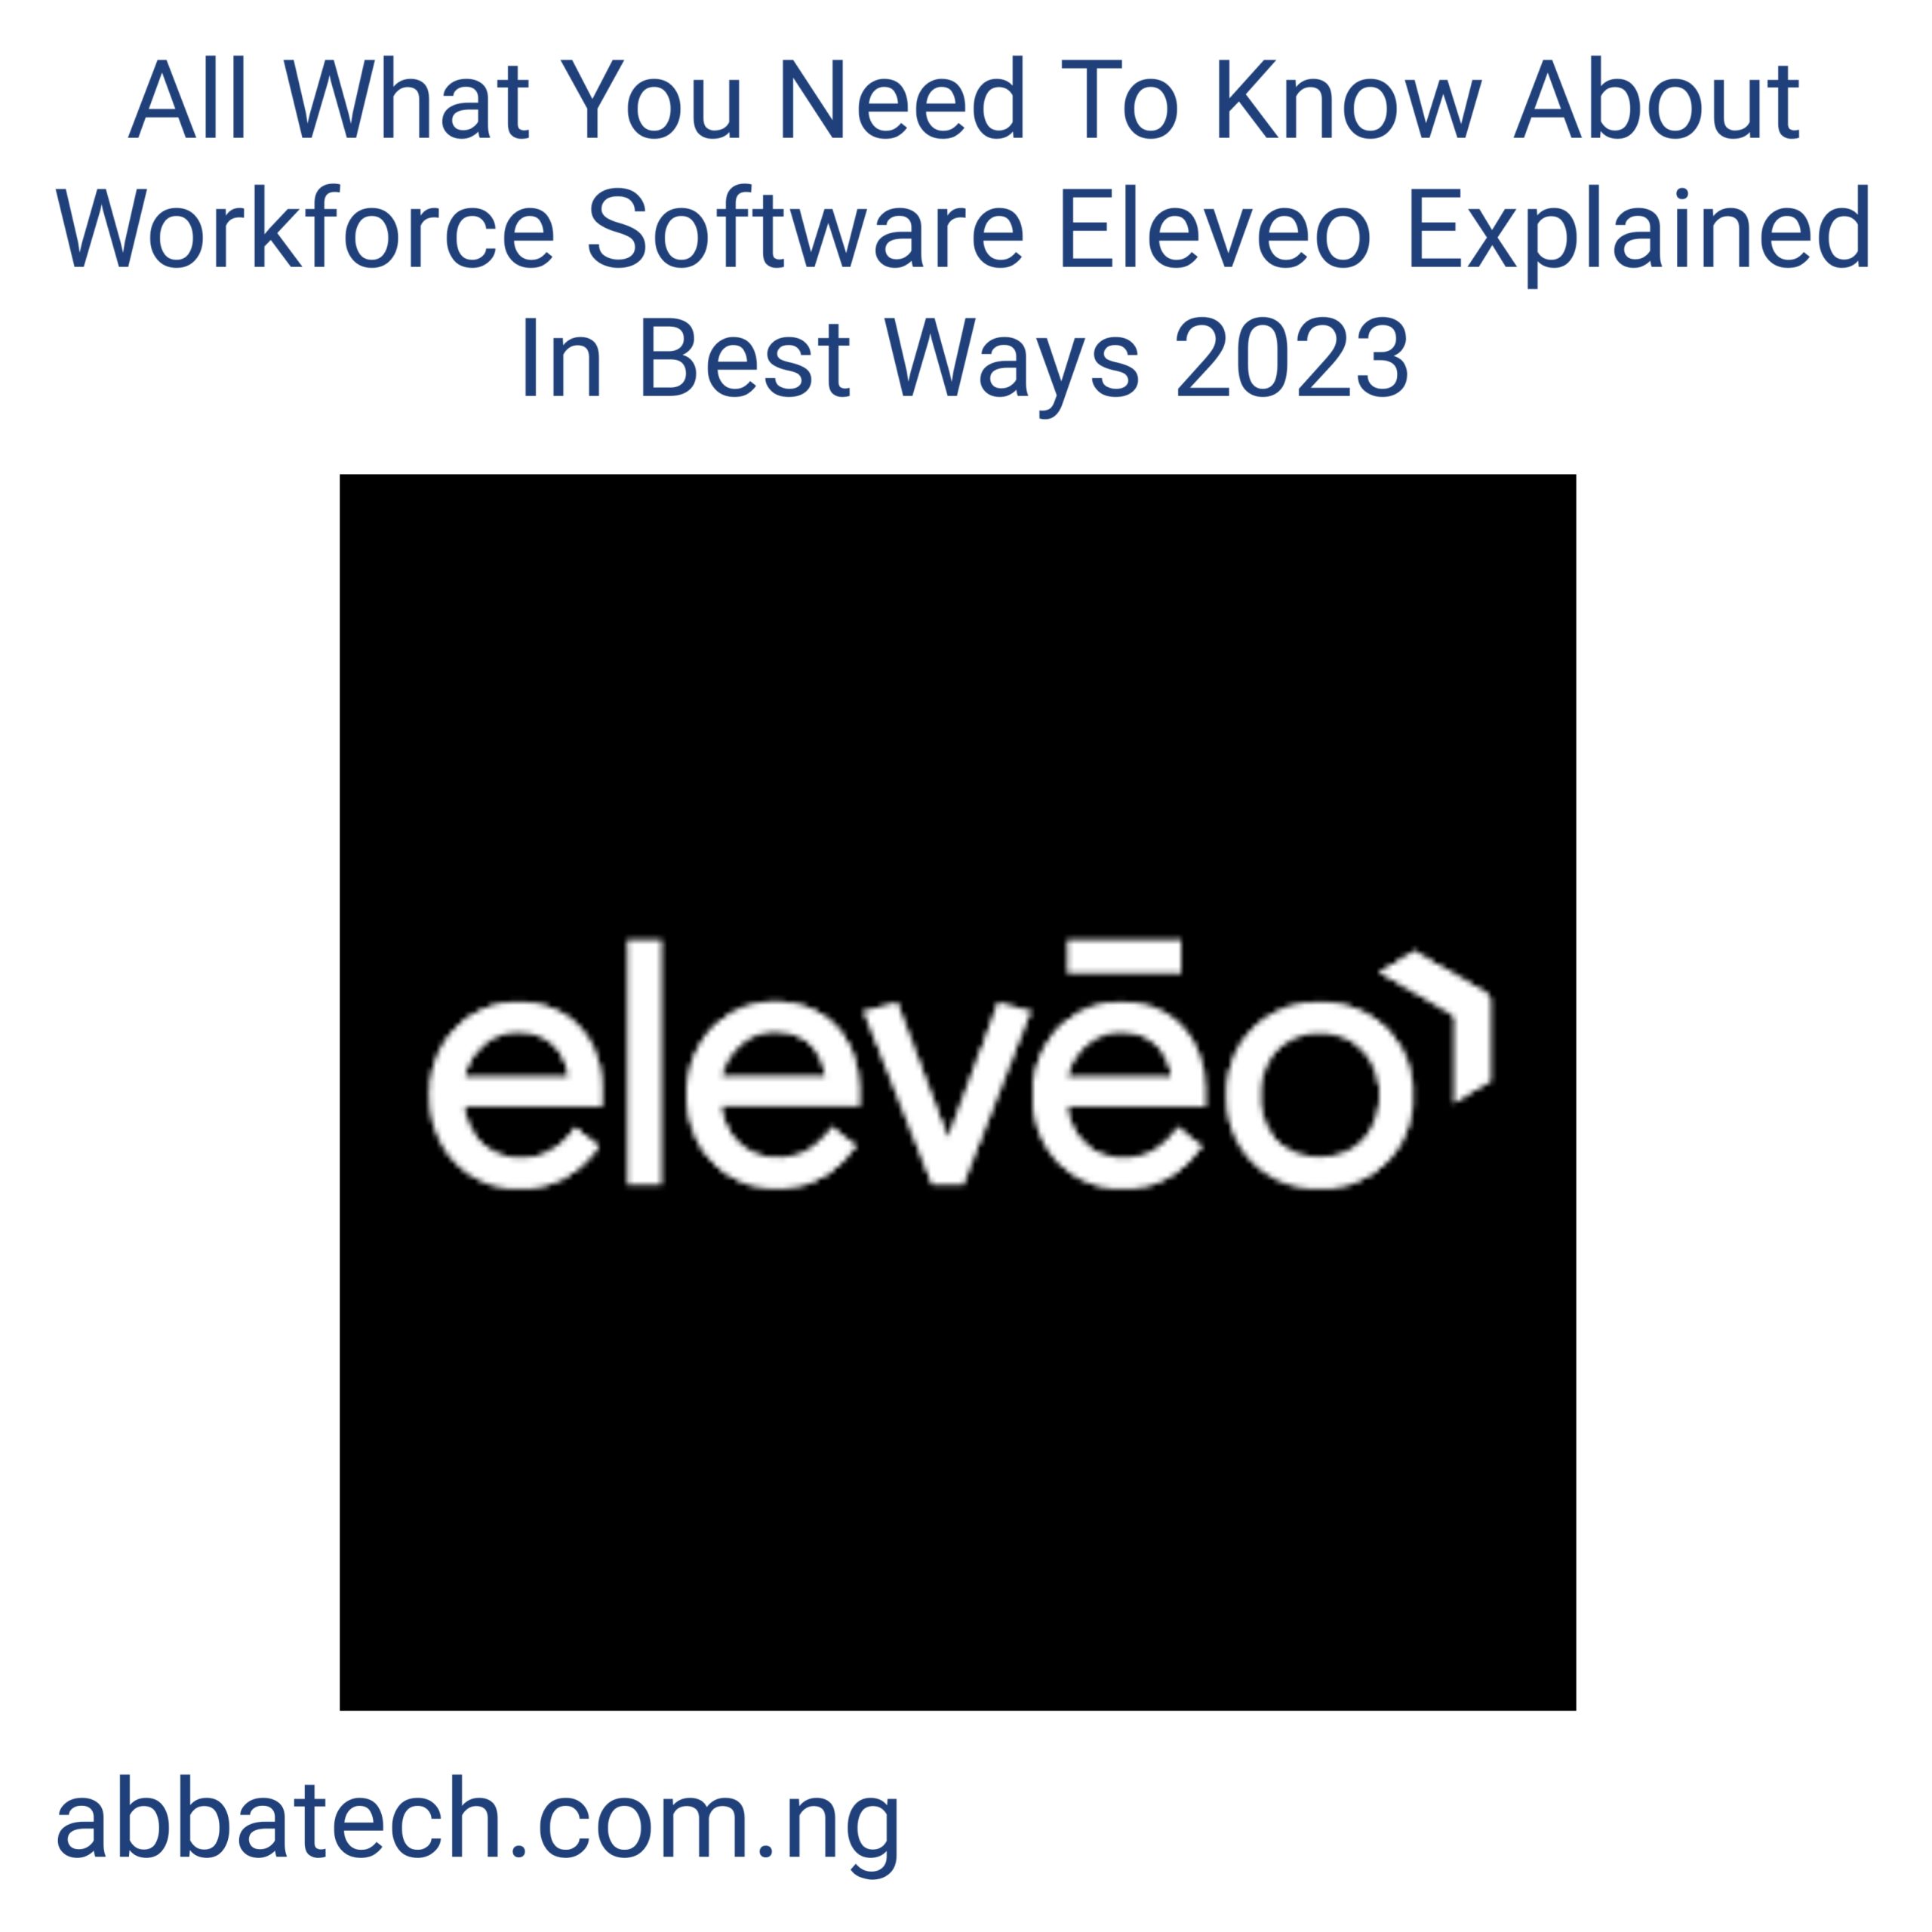 All What You Need To Know About Workforce Software Eleveo Explained In Best Ways 2023